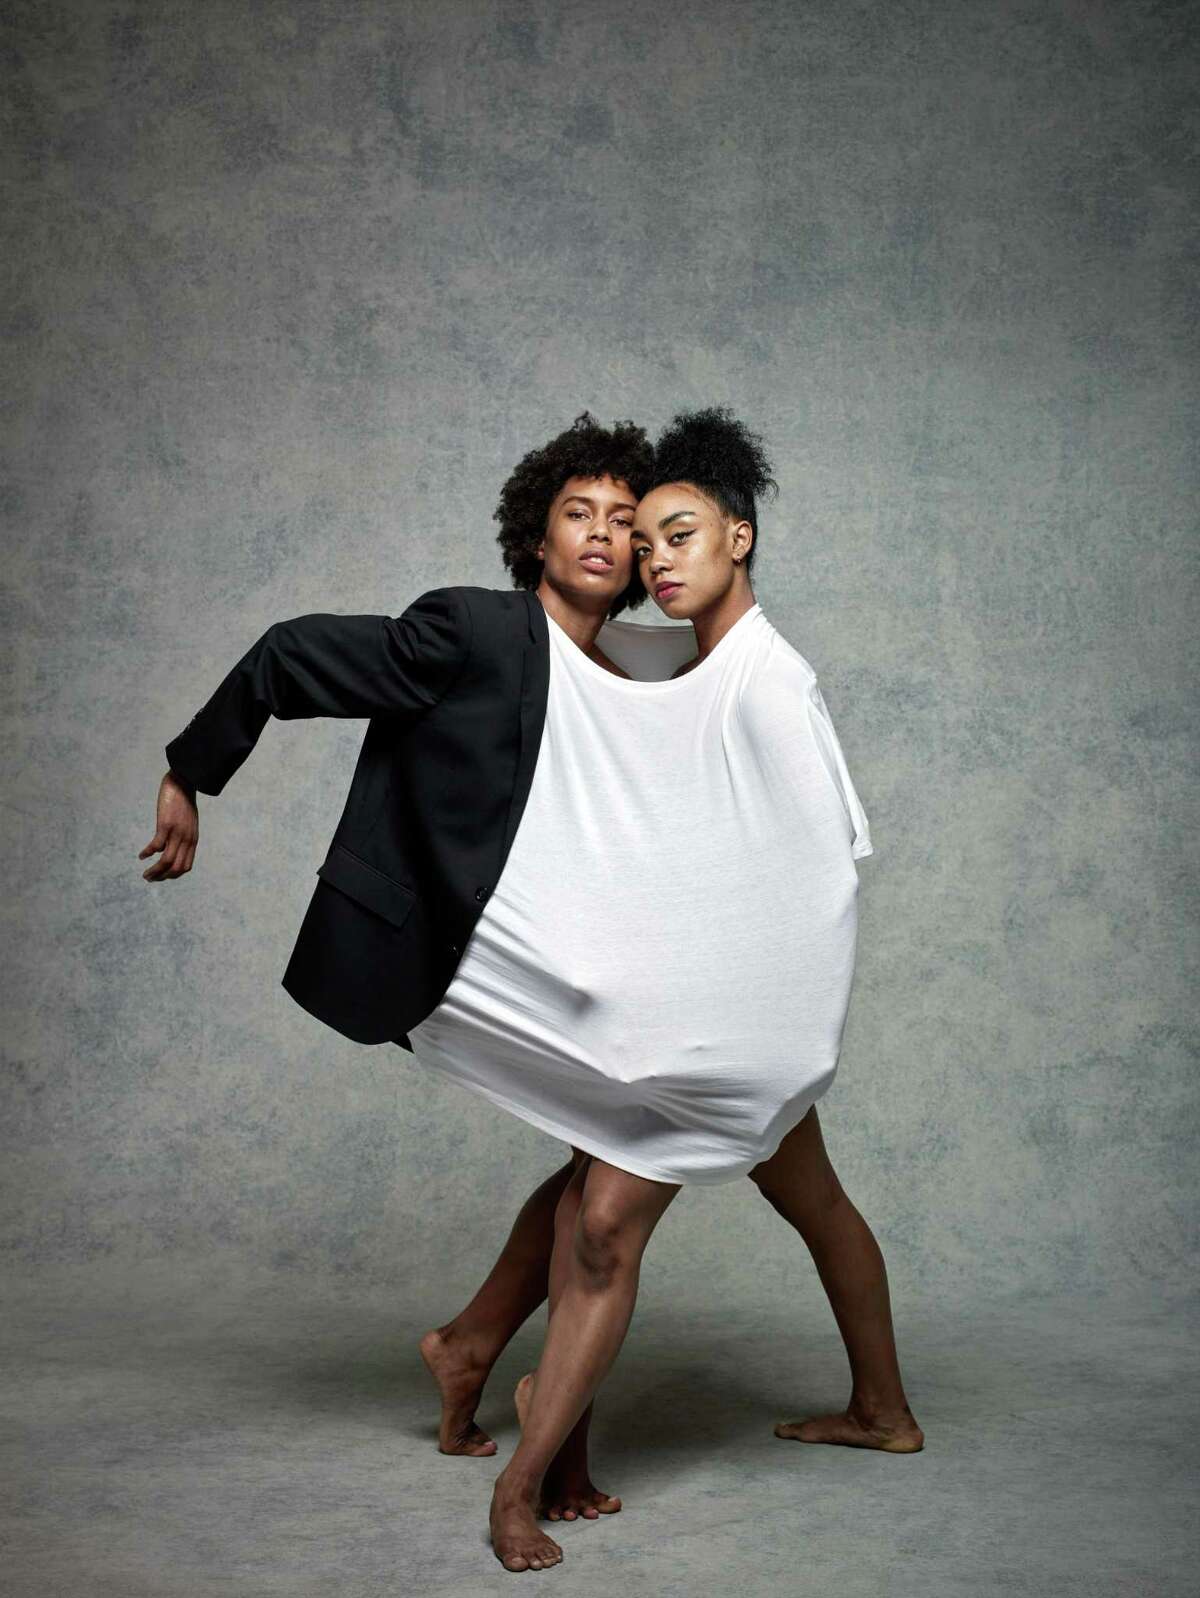 Catherine Ellis Kirk and Marcella Lewis are among the performers in Kyle Abraham's A.I.M. dance company. Society for the Performing Arts will present the world premiere of A.I.M.'s "Until the End of All Time," the first part of a trilogy to be developed during the next six years, June 4-5, 2020 at Wortham Theater Center.